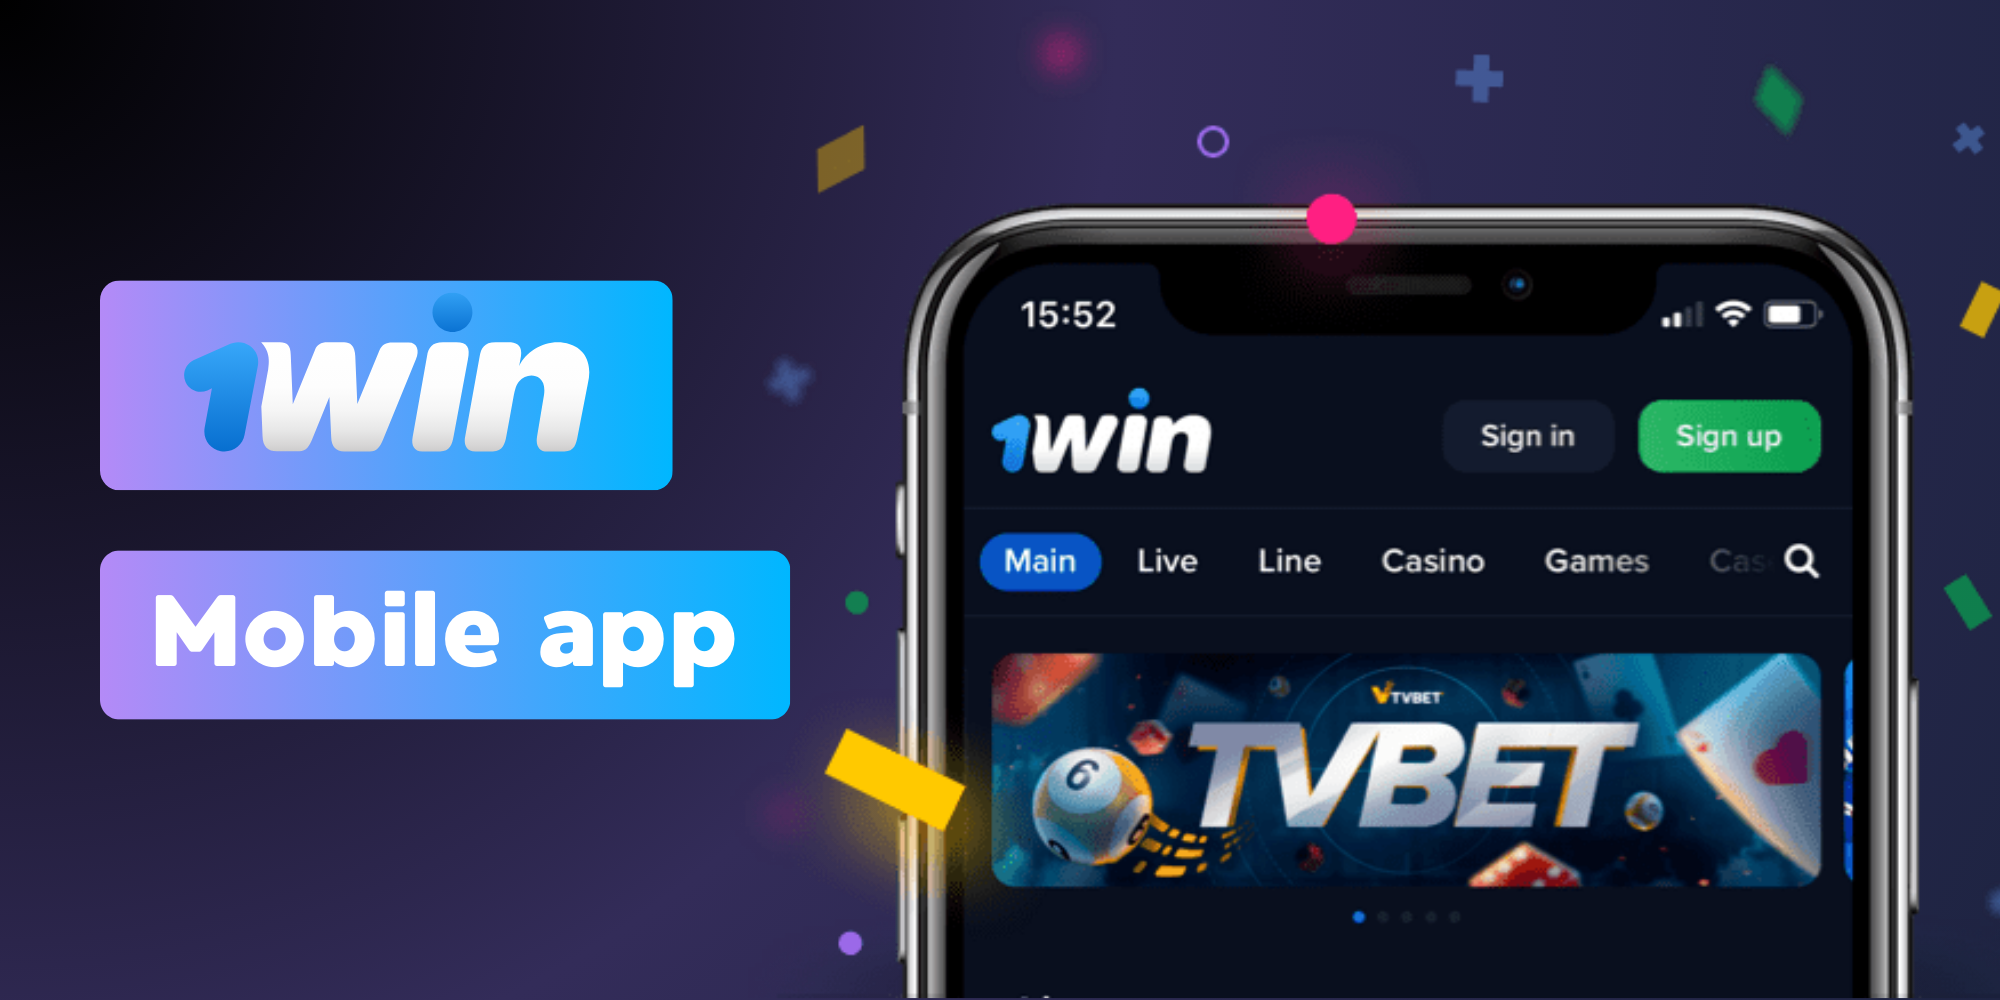 With the 1win app for iOS and Android, you can easily bet in India on your favorite sports events